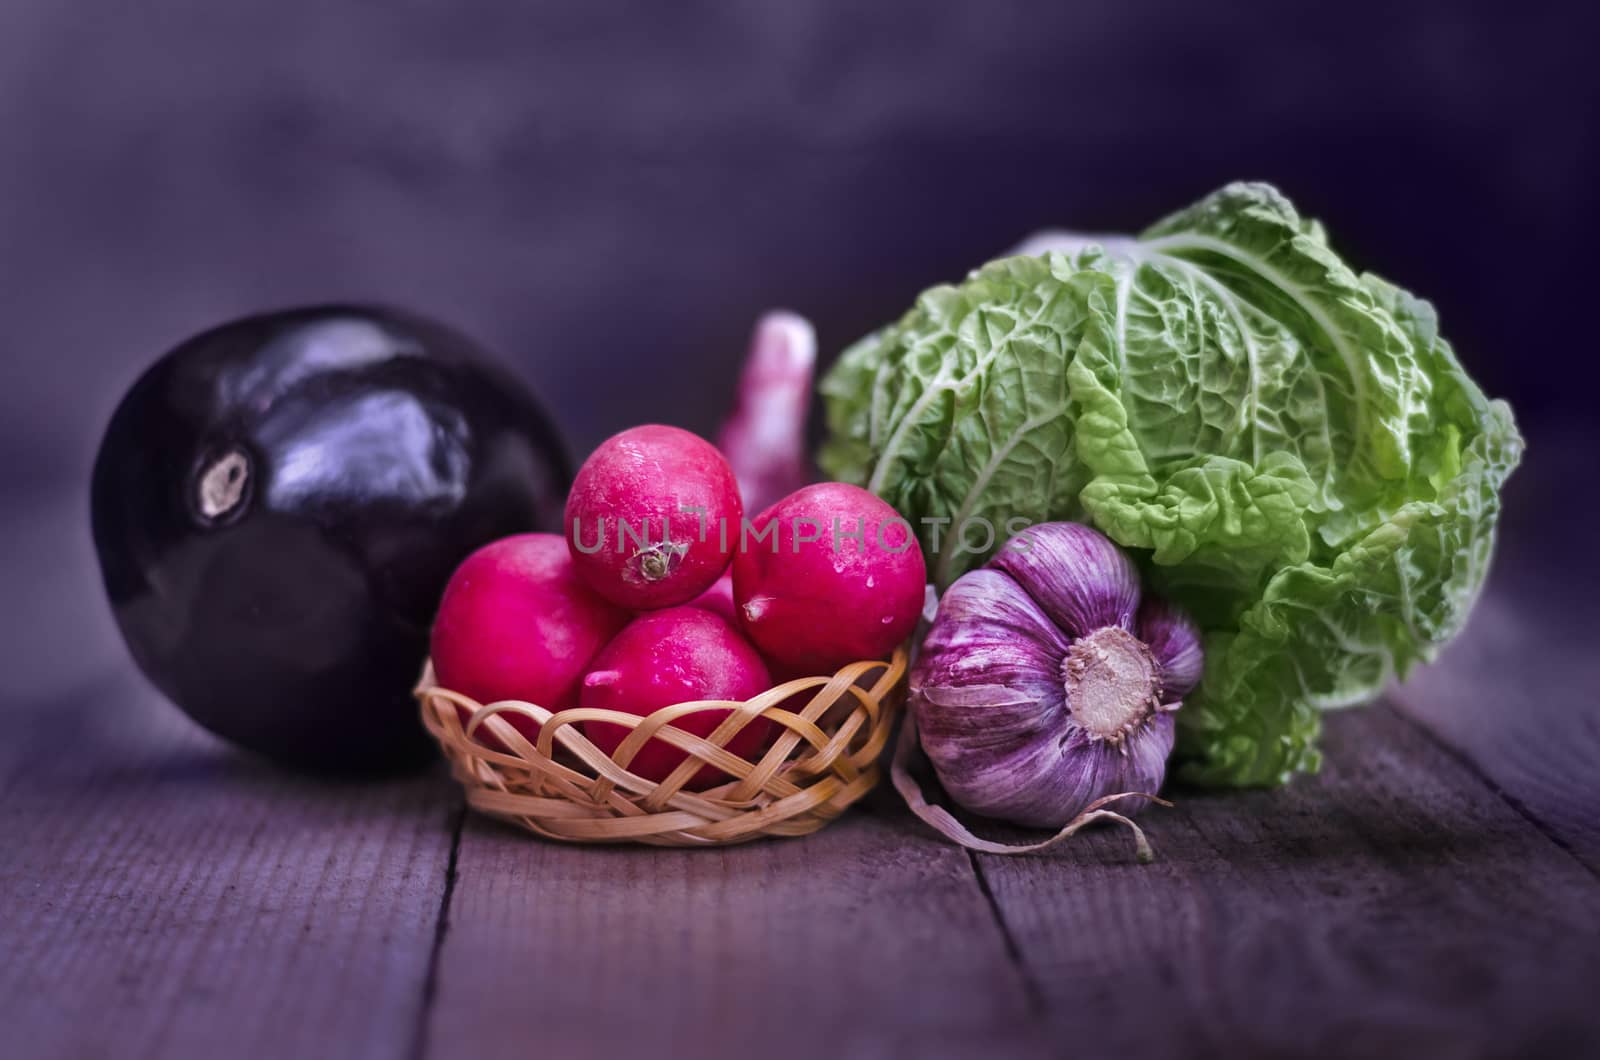 Vegetables on the old boards and a blurred background. by Gaina